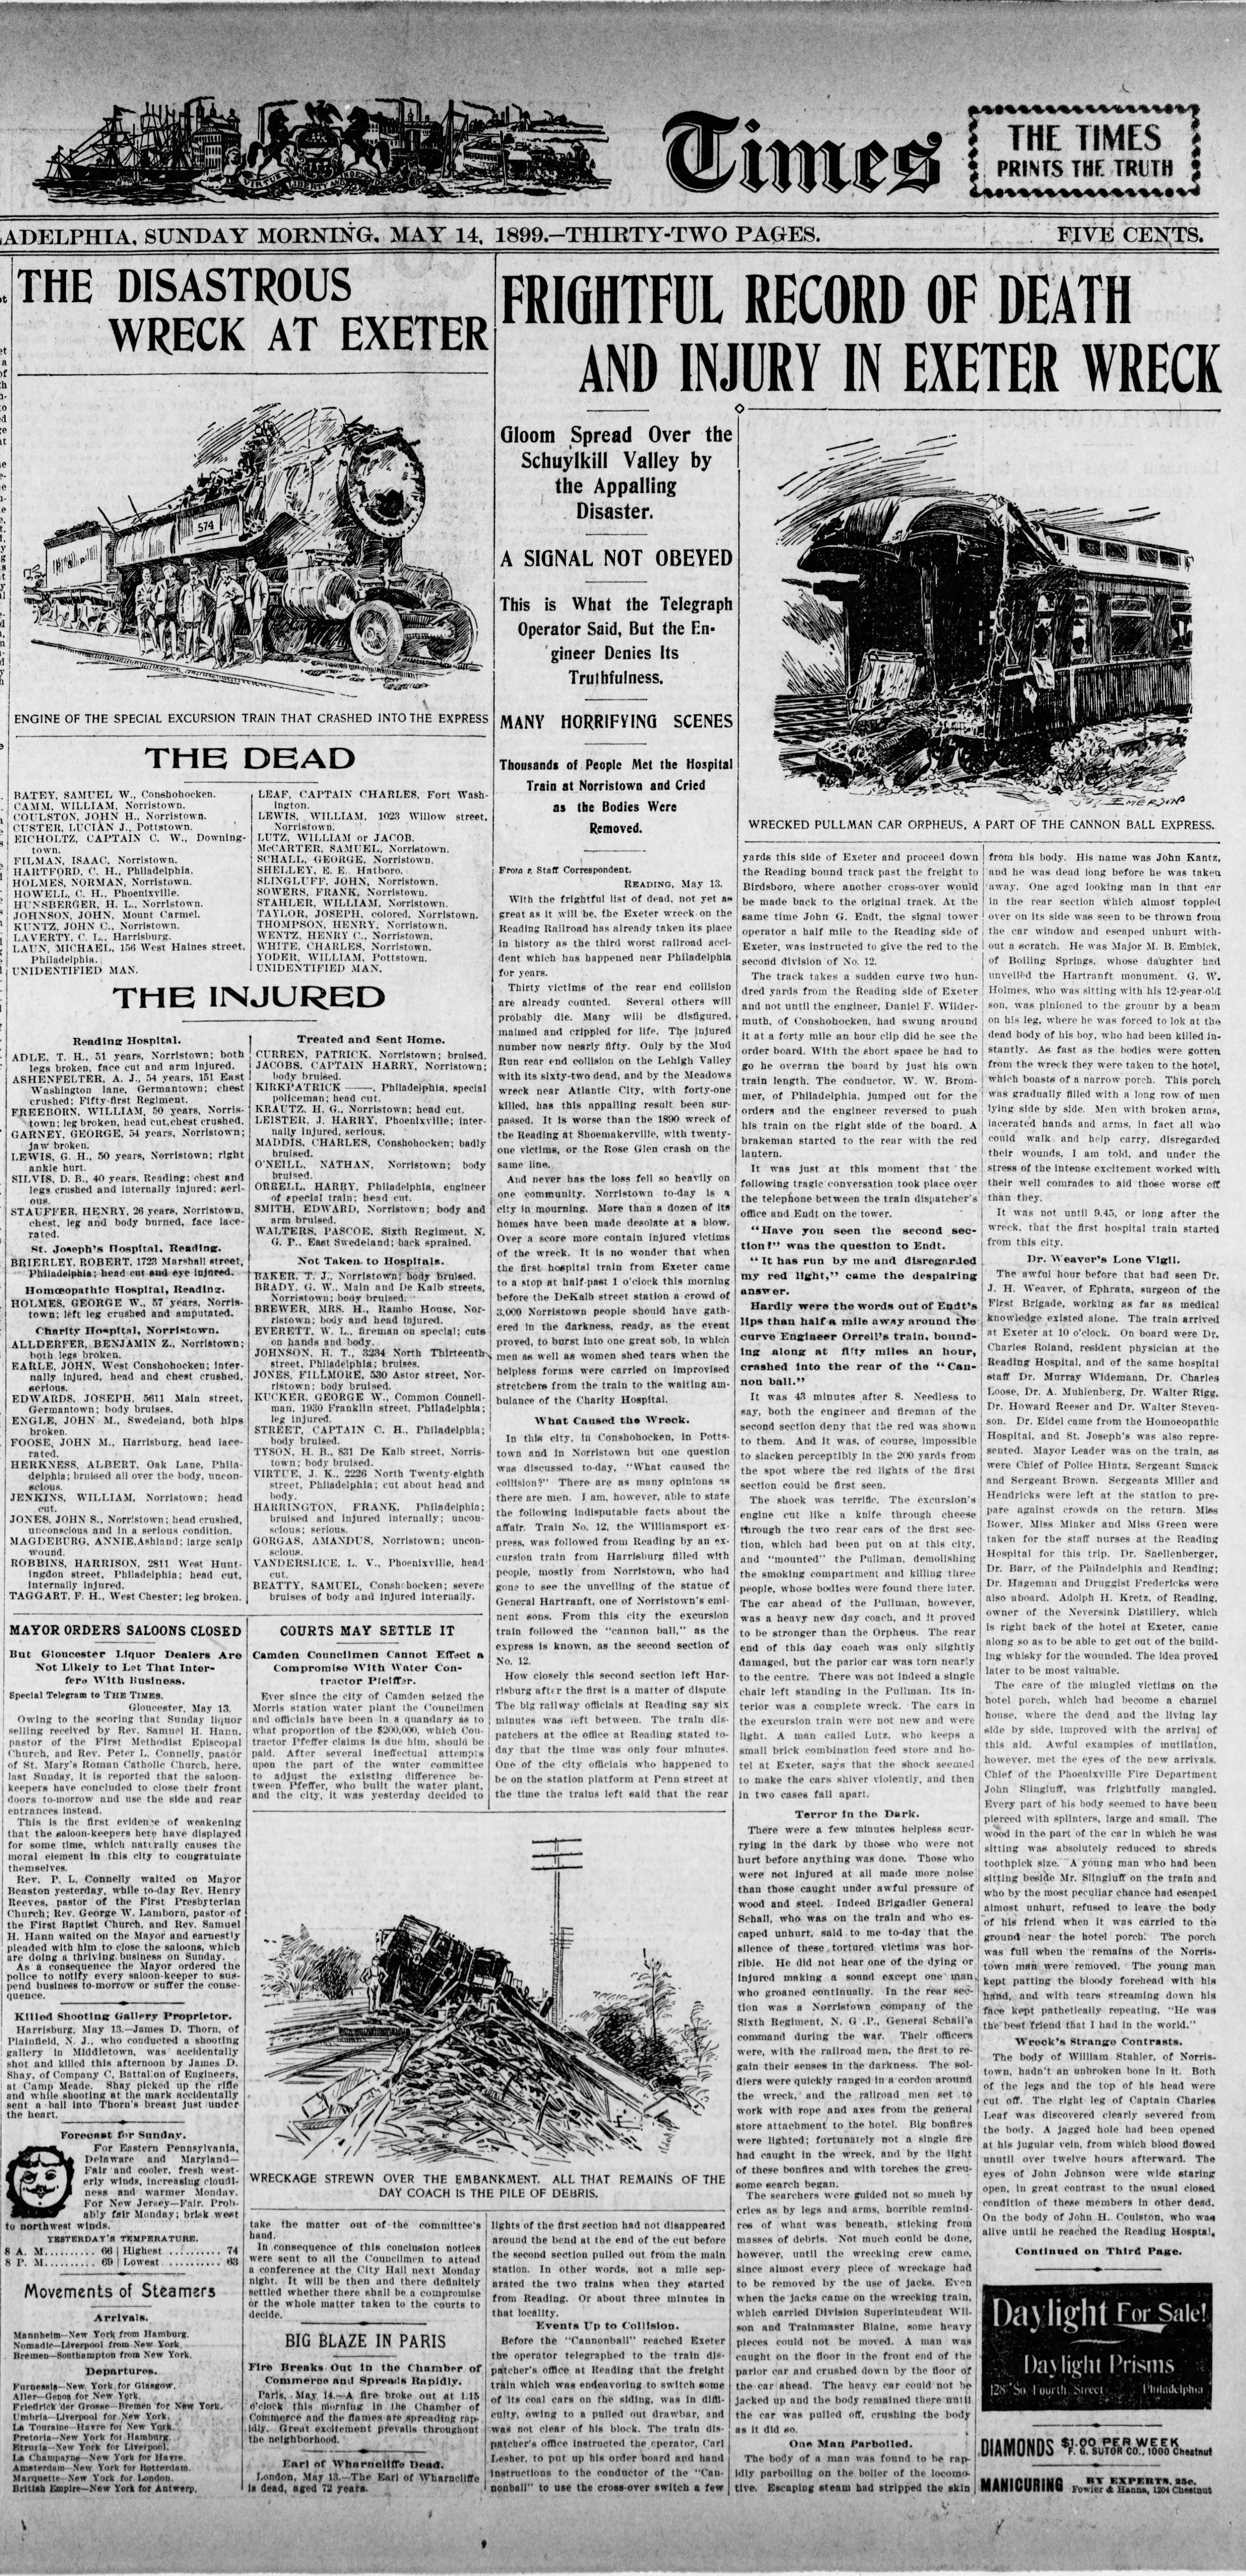 Exeter, PA Train Wreck - May 12, 1899